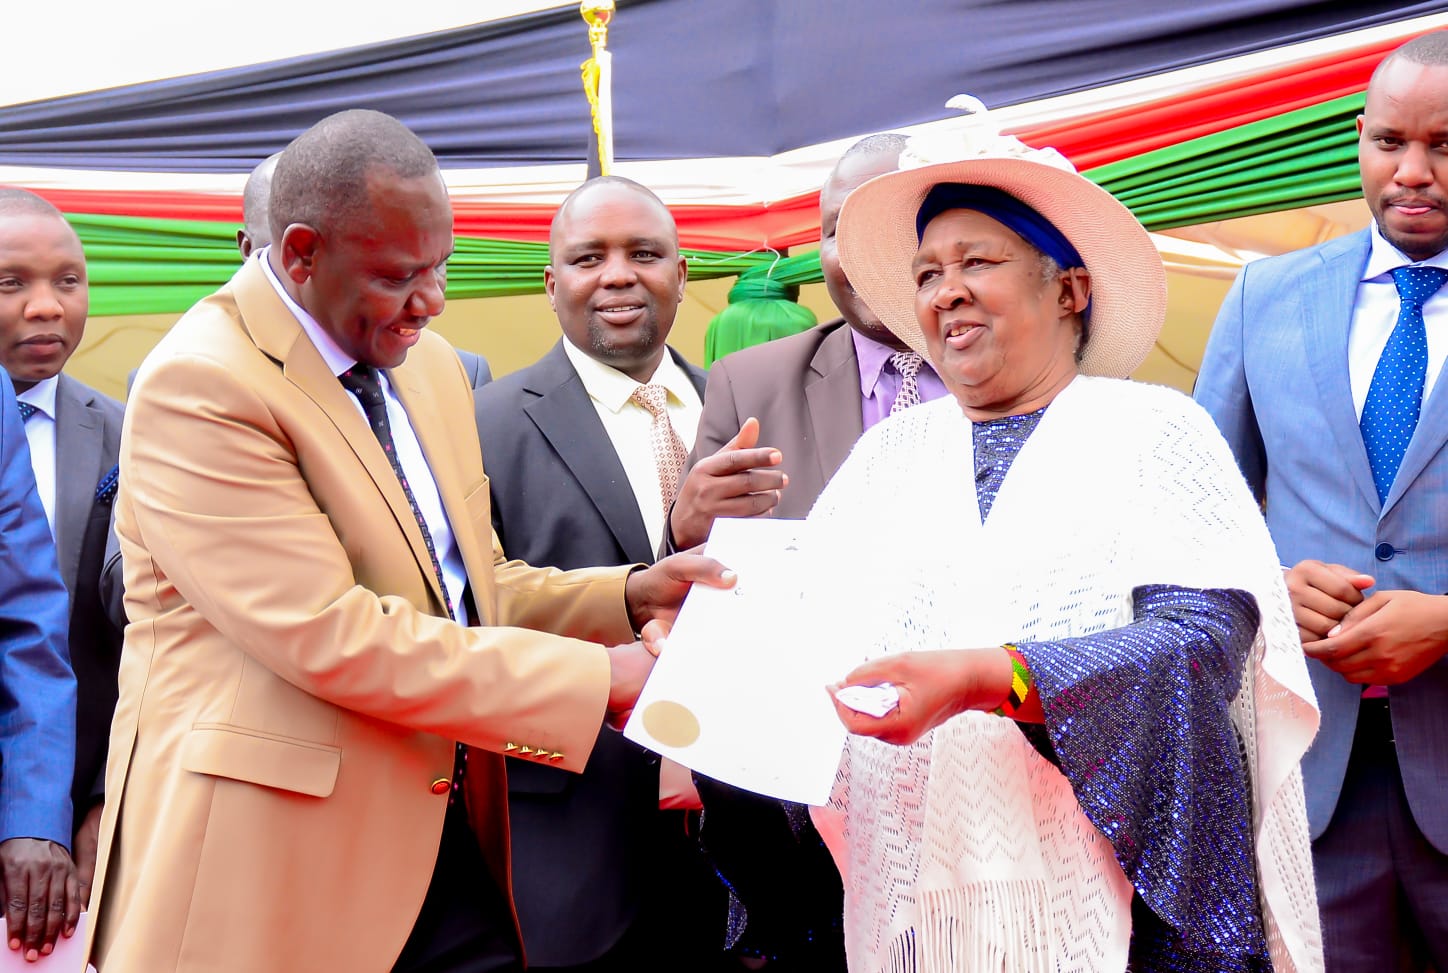 505 title deeds issued to land owners in Uasin Gishu